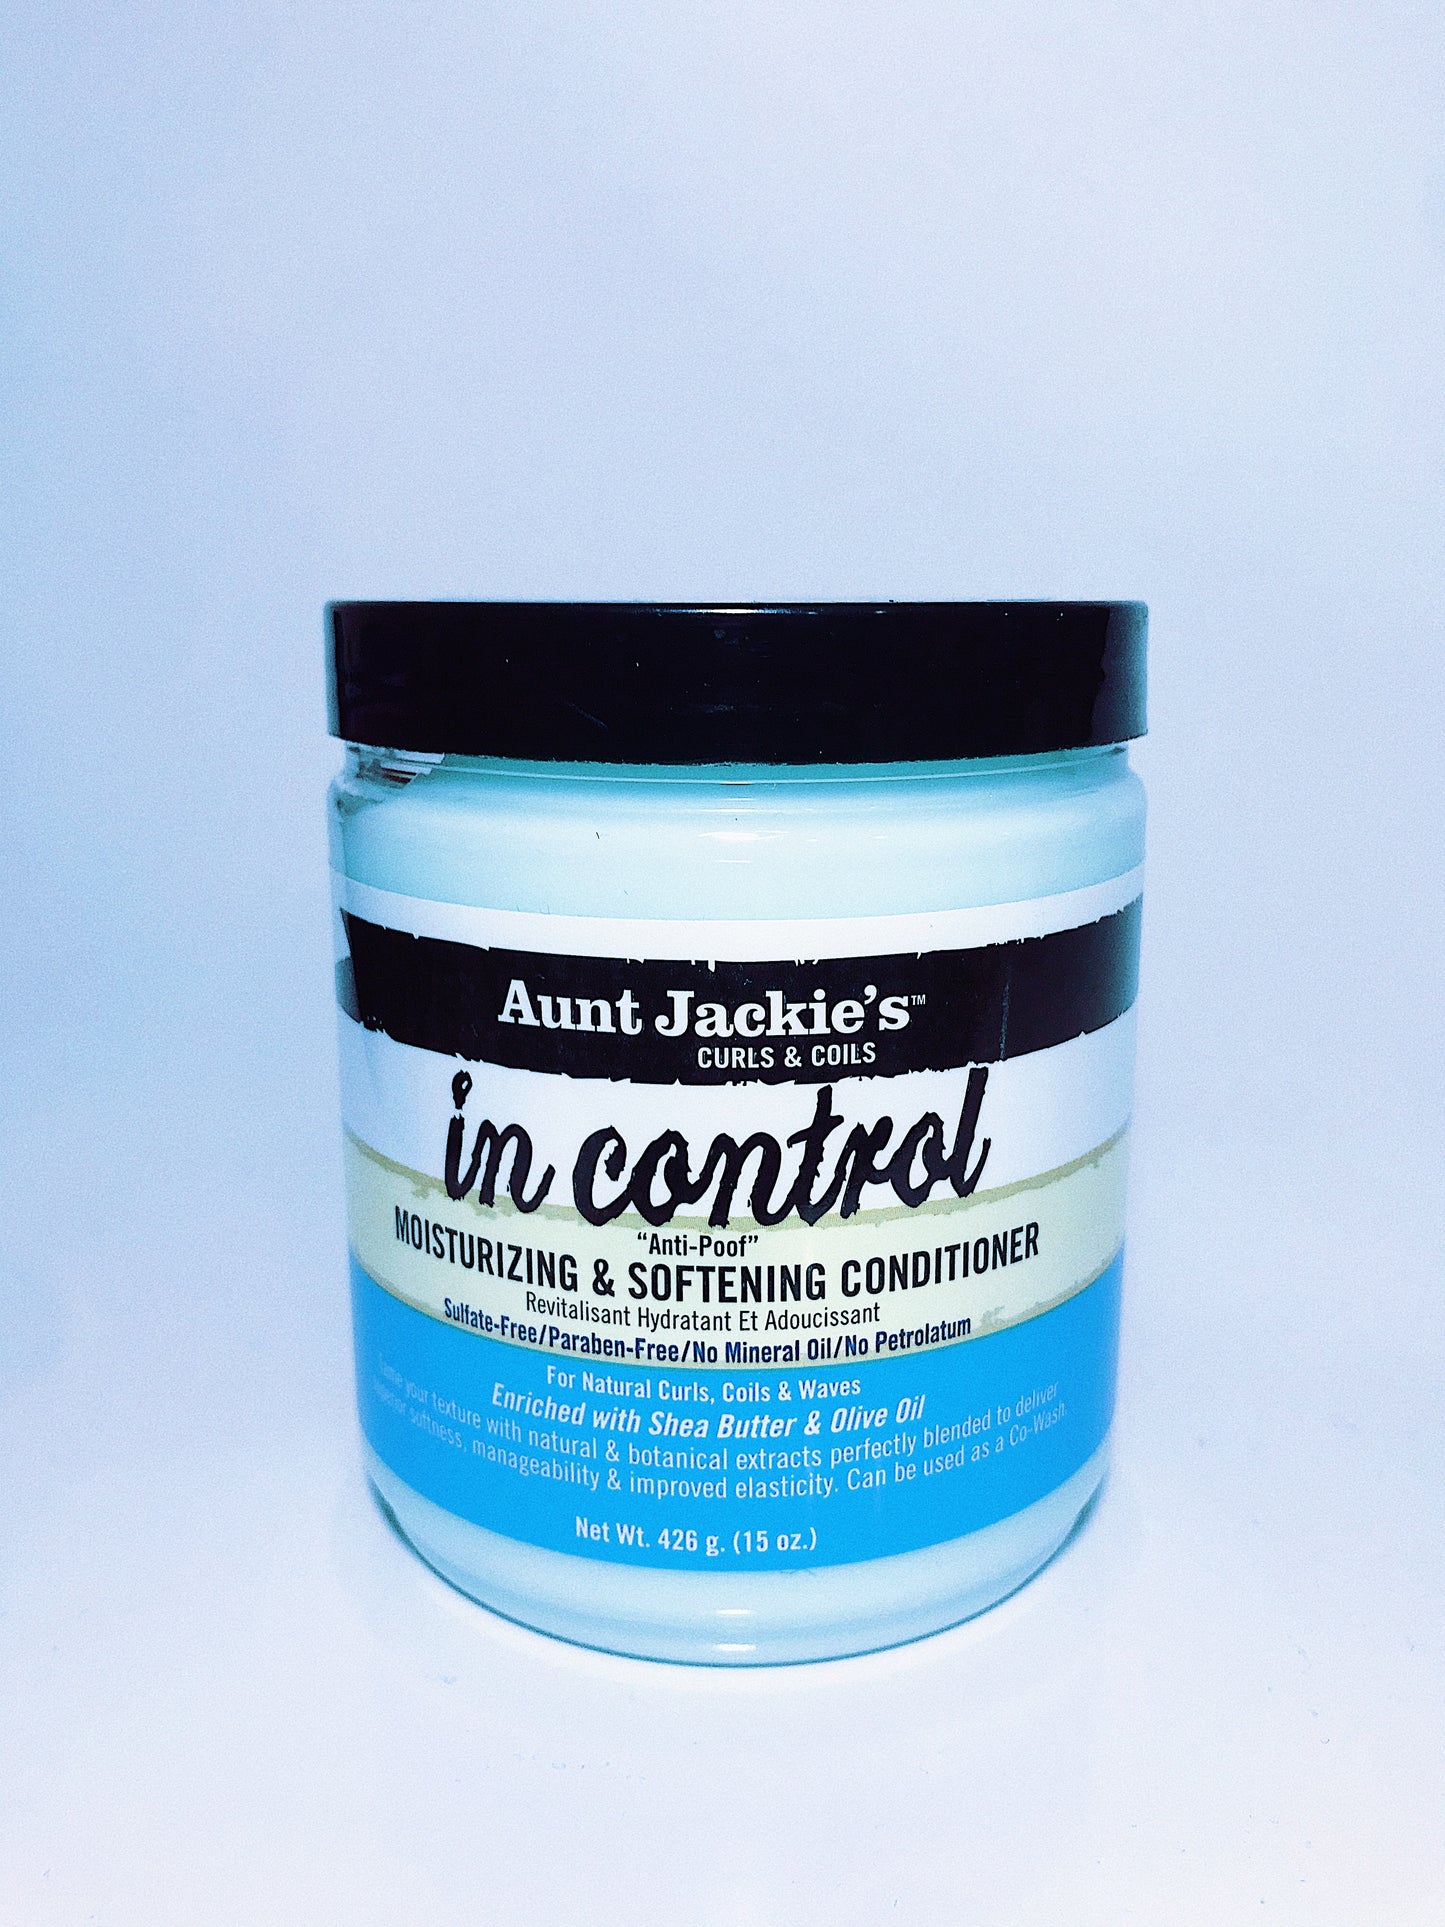 Aunt Jackie's In control Moisturizing & Softening Conditioner